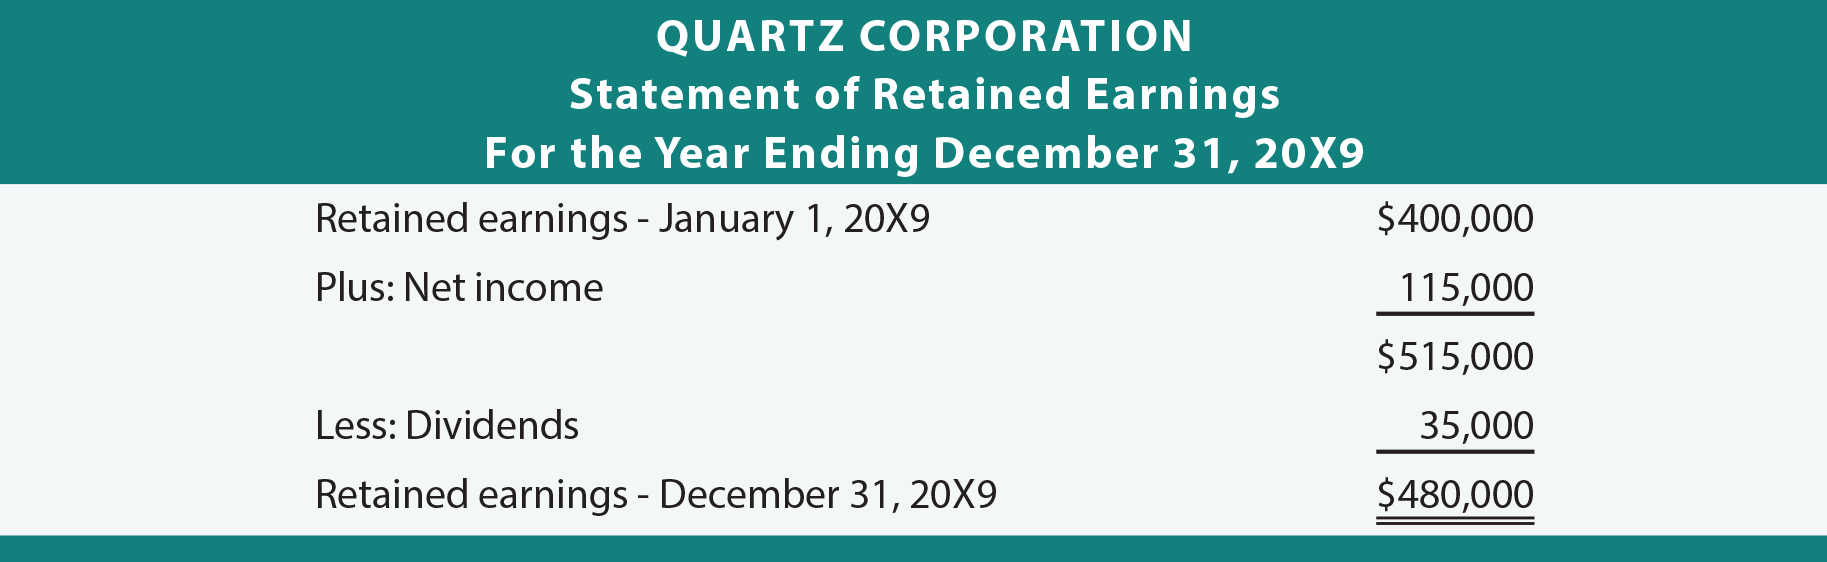 Quartz Corporation Statement of Retained Earnings